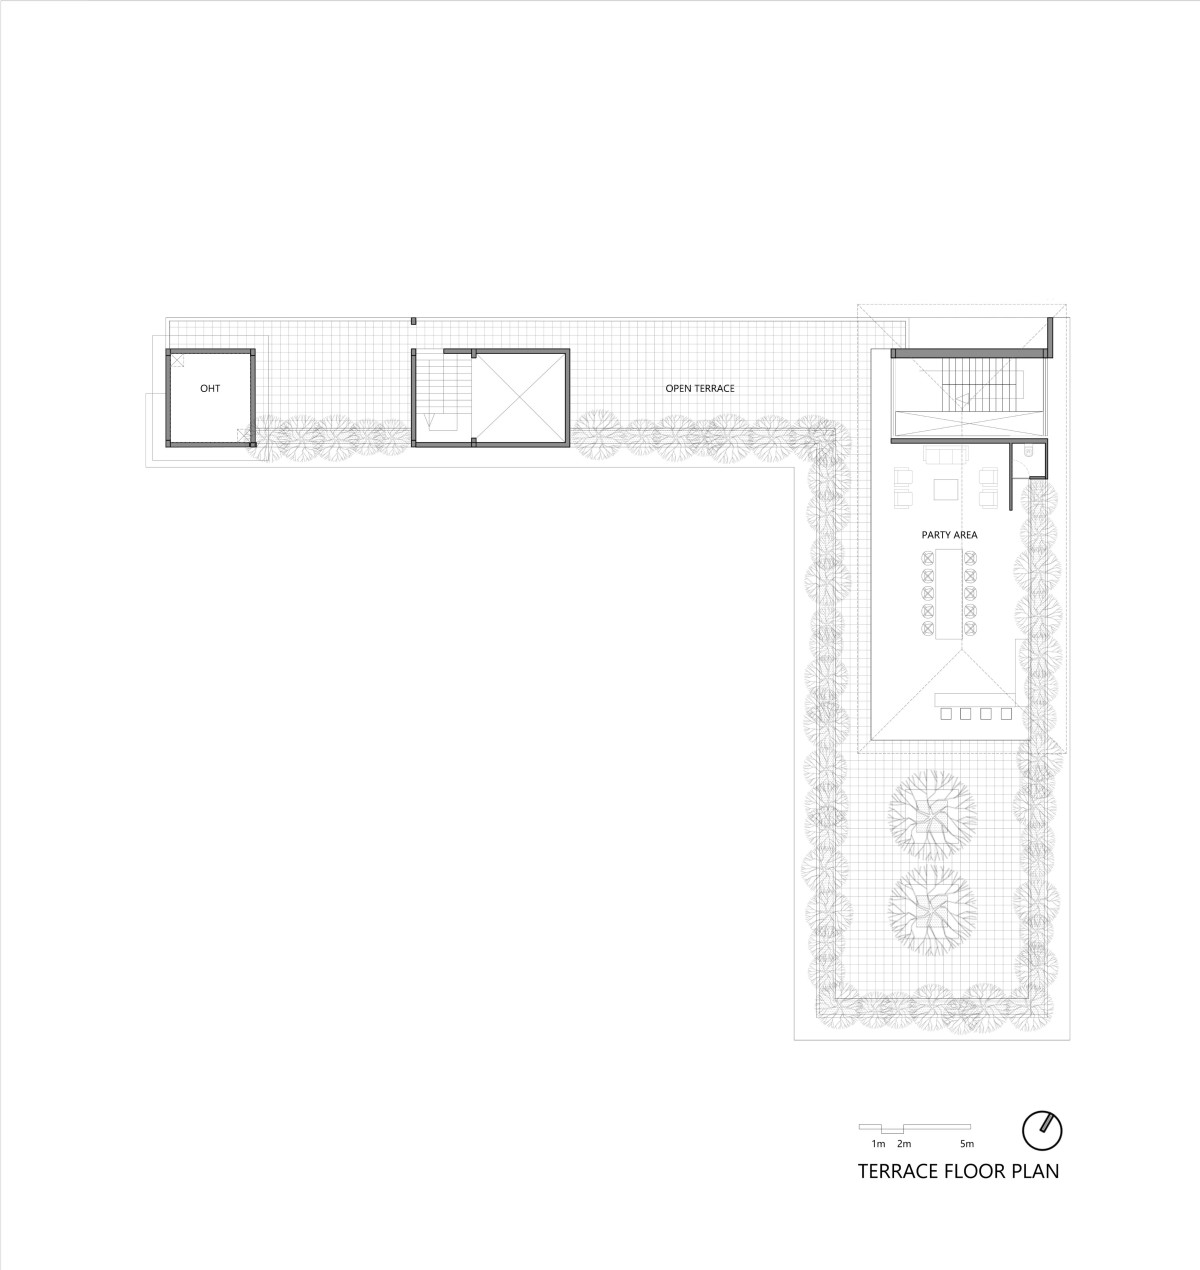 Terrace plan of Ground floor plan of The Natural Floors by Barefoot Architects